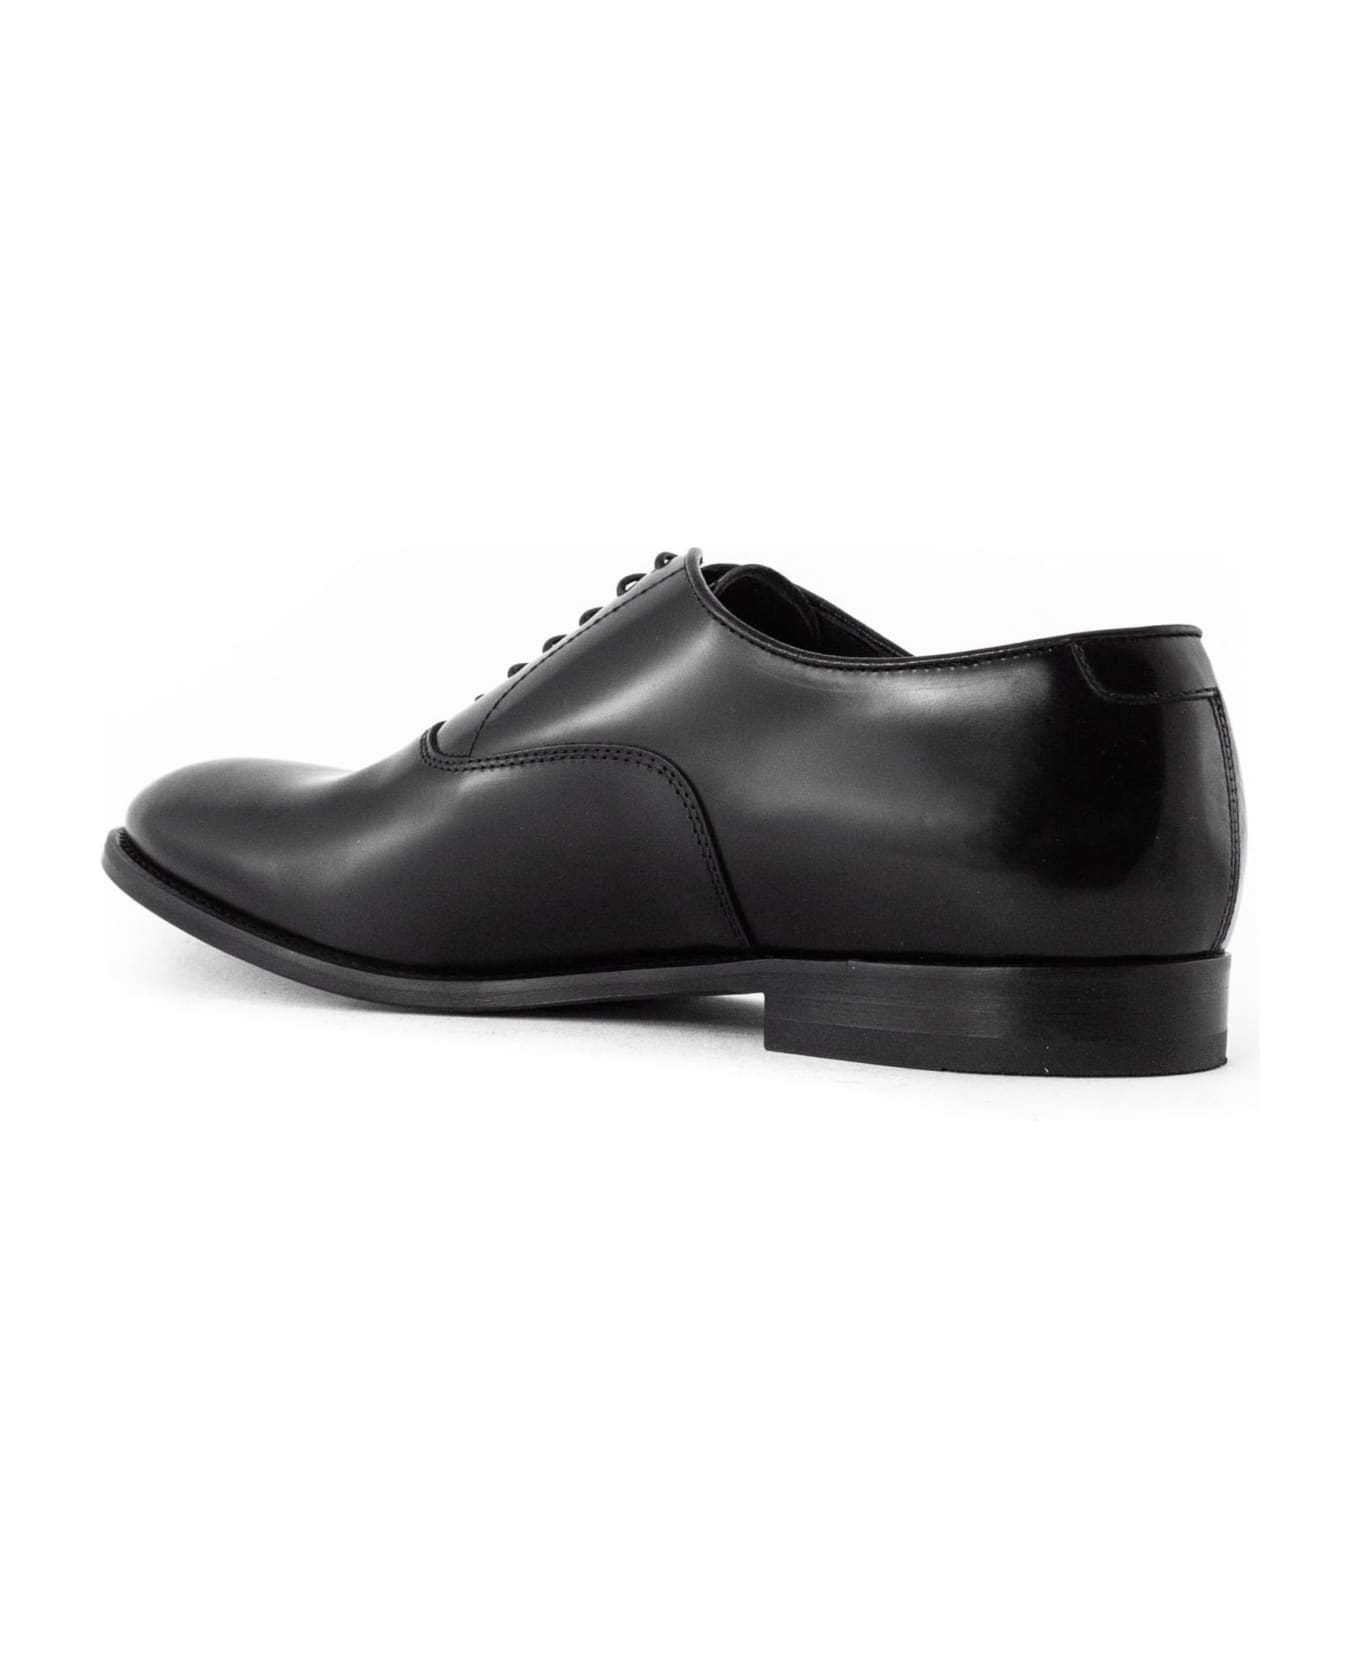 Doucal's Oxford Black Leather Laced Shoes - Black